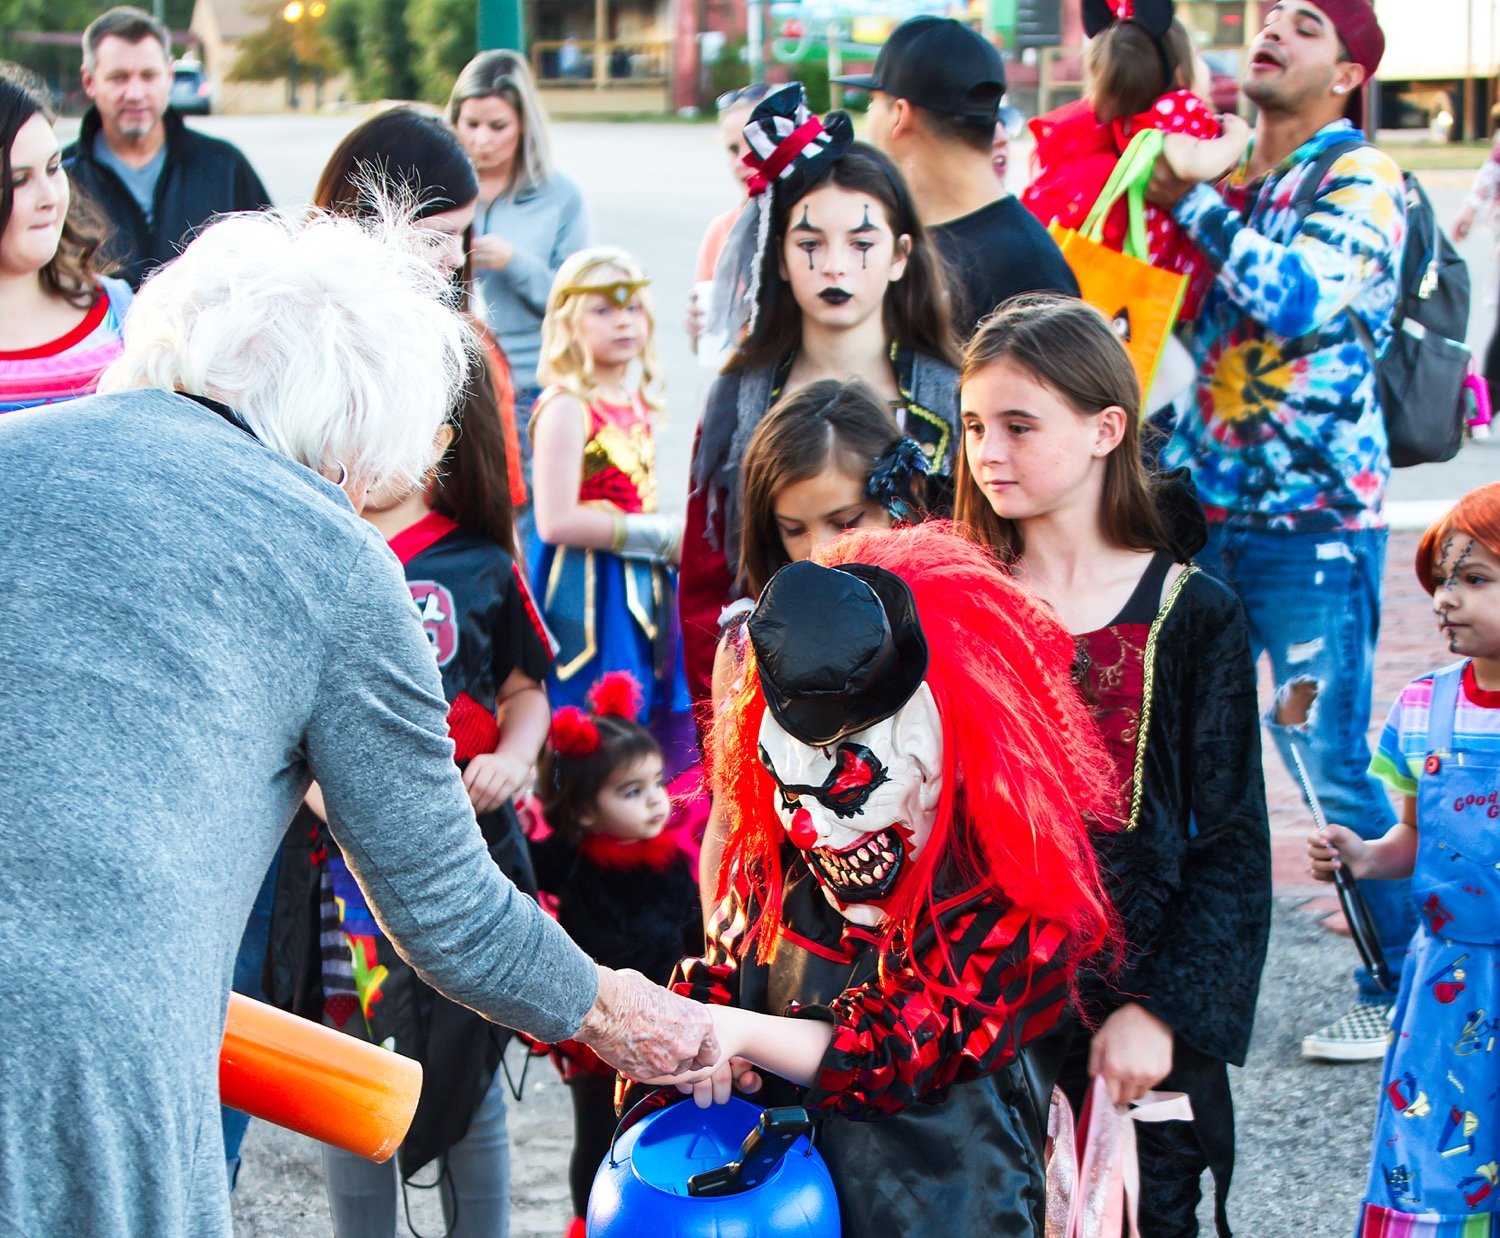 A crowd gathers for candy near the gazebo in downtown Mineola on the evening of Halloween.